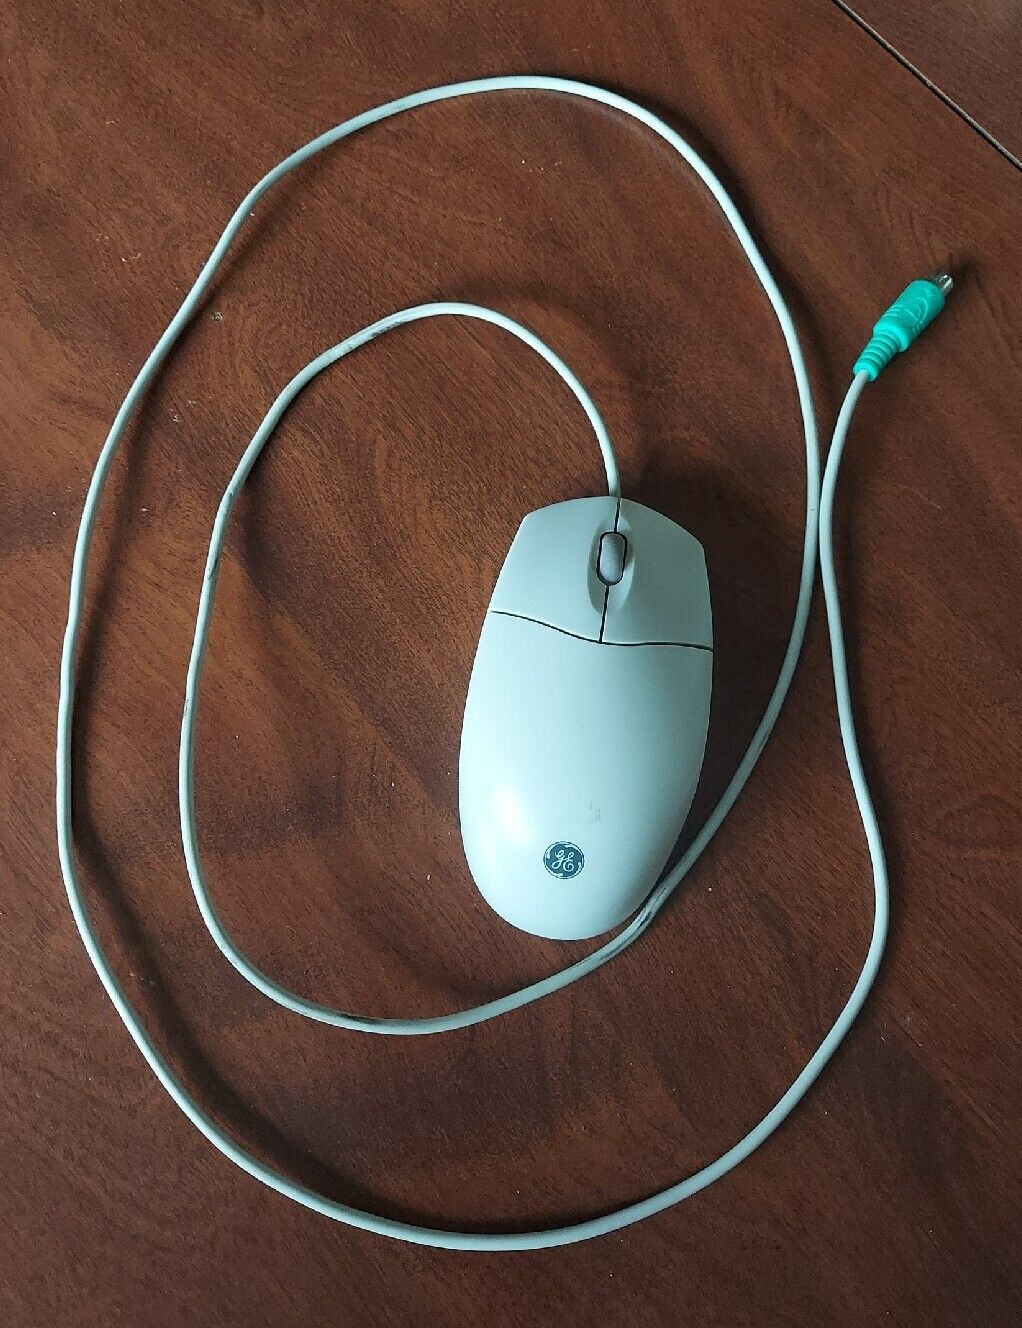 GE Wired Scroll Mouse WK4204